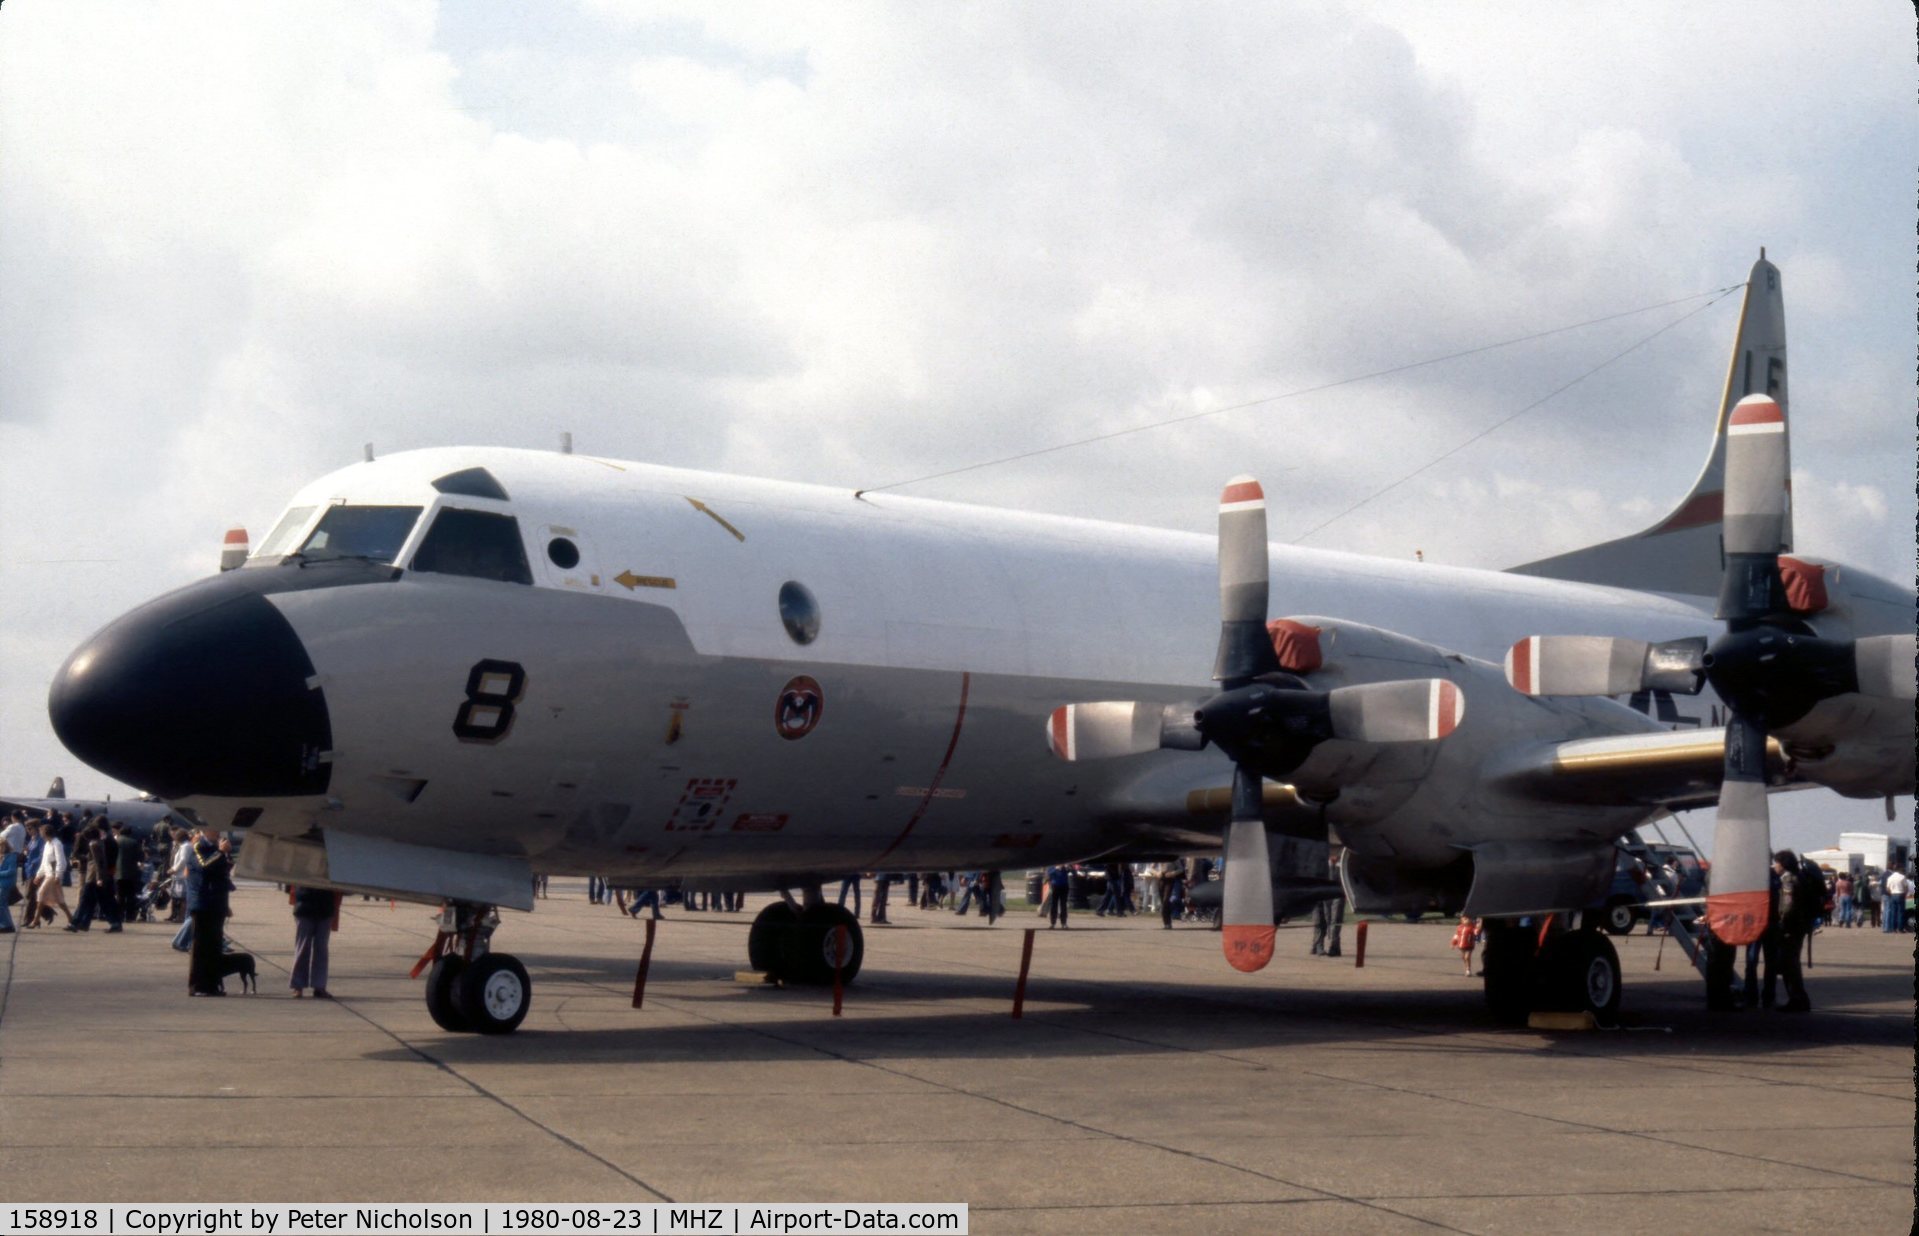 158918, Lockheed P-3C Orion C/N 285A-5590, Another view of the VP-16 P-3C Orion on display at the 1980 Mildenhall Air Fete.